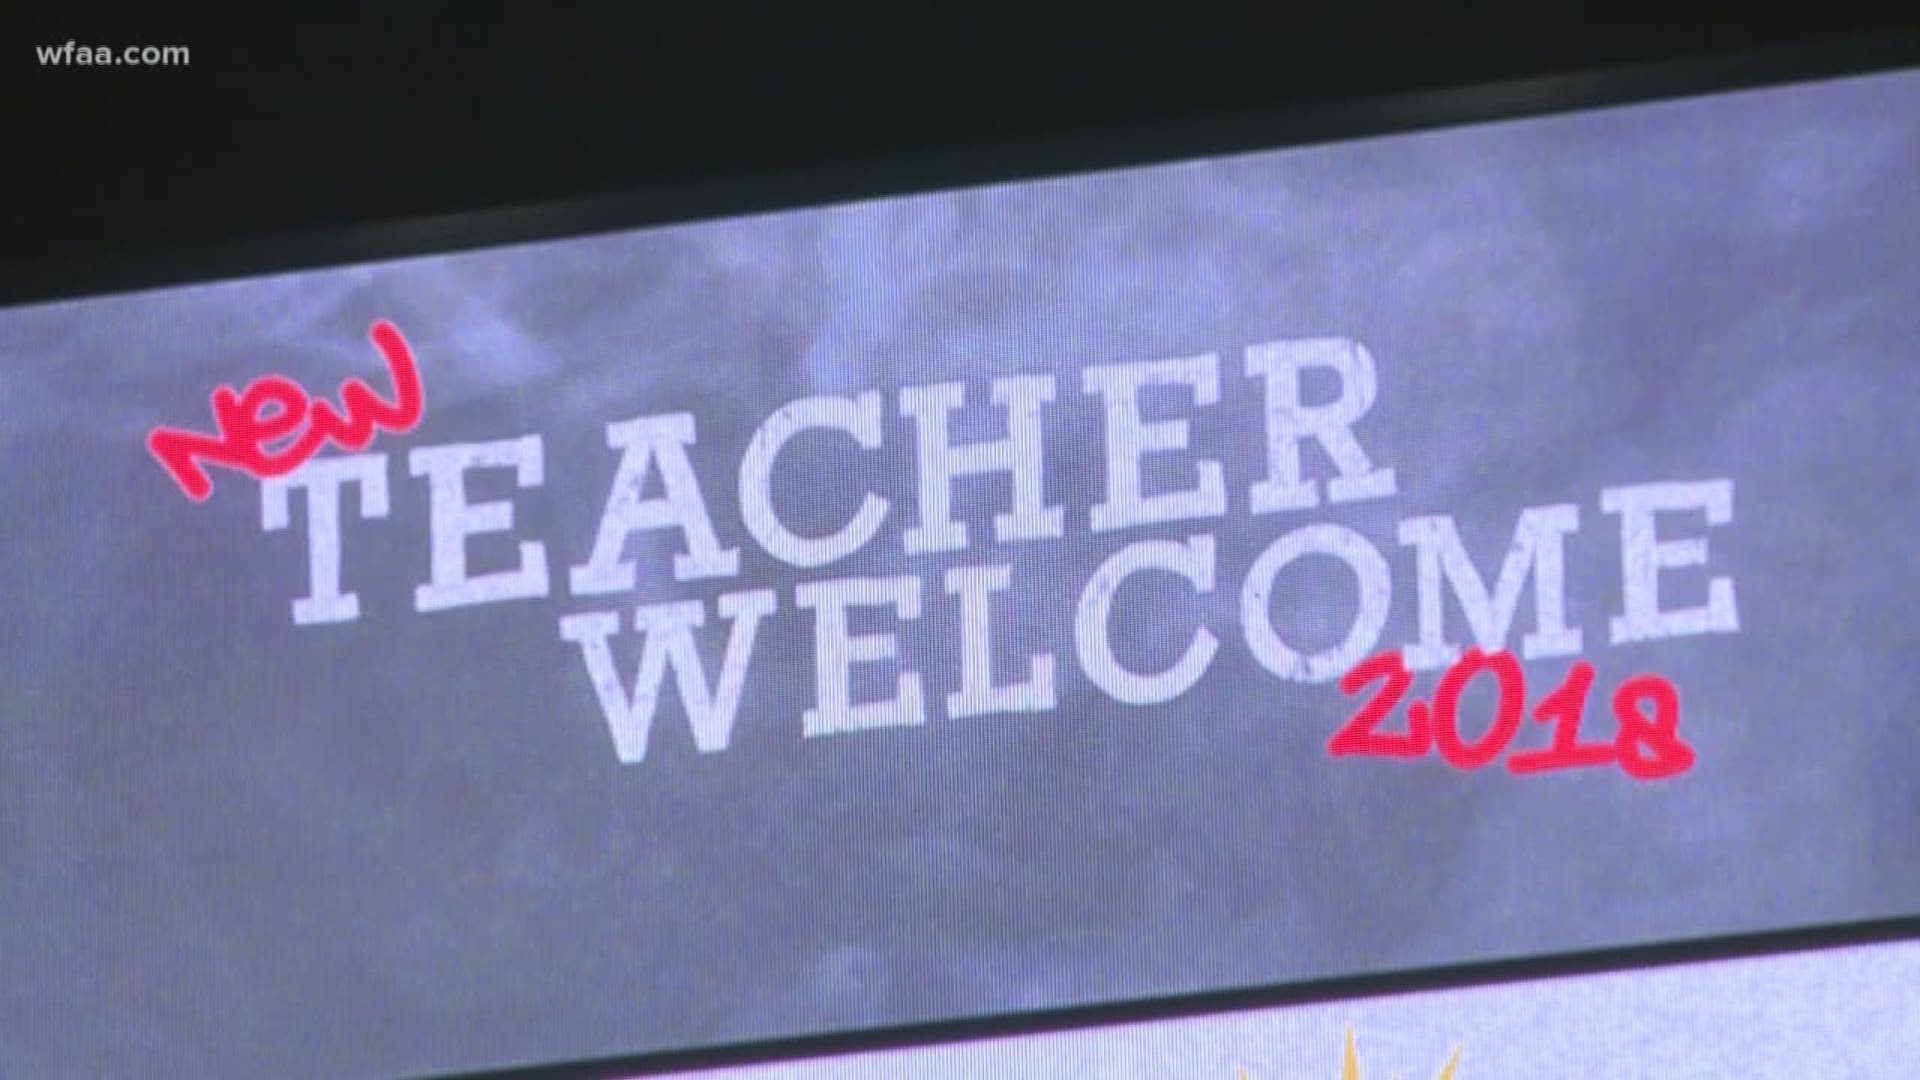 The teachers were welcomed to the new district on Monday.